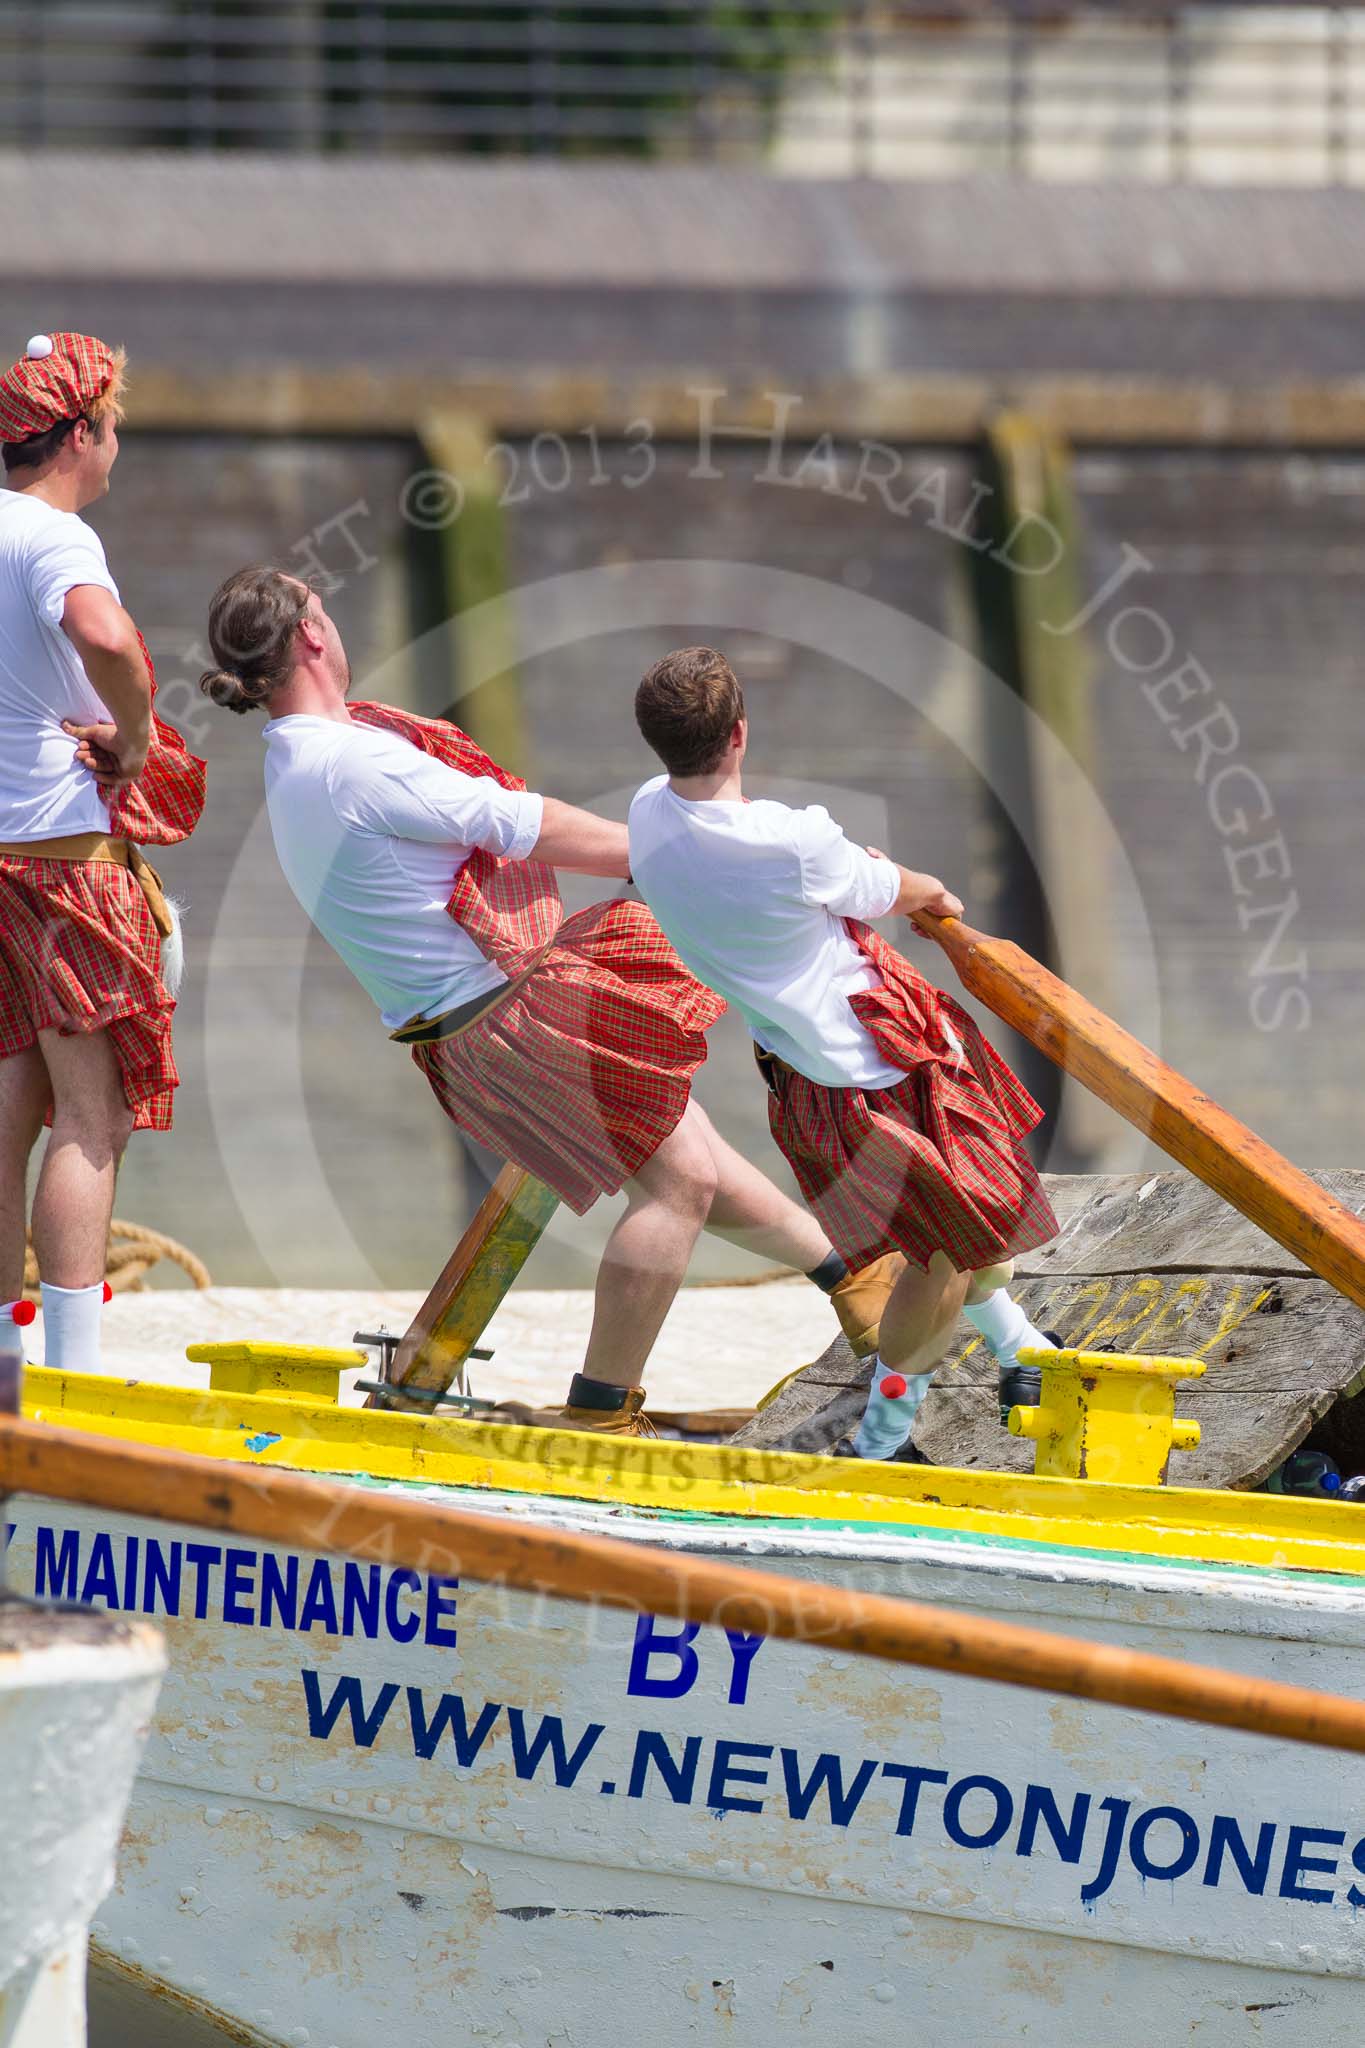 TOW River Thames Barge Driving Race 2013: Rowers wearing skirts on the deck of of barge "Hoppy" by GPS Fabrication..
River Thames between Greenwich and Westminster,
London,

United Kingdom,
on 13 July 2013 at 12:44, image #192